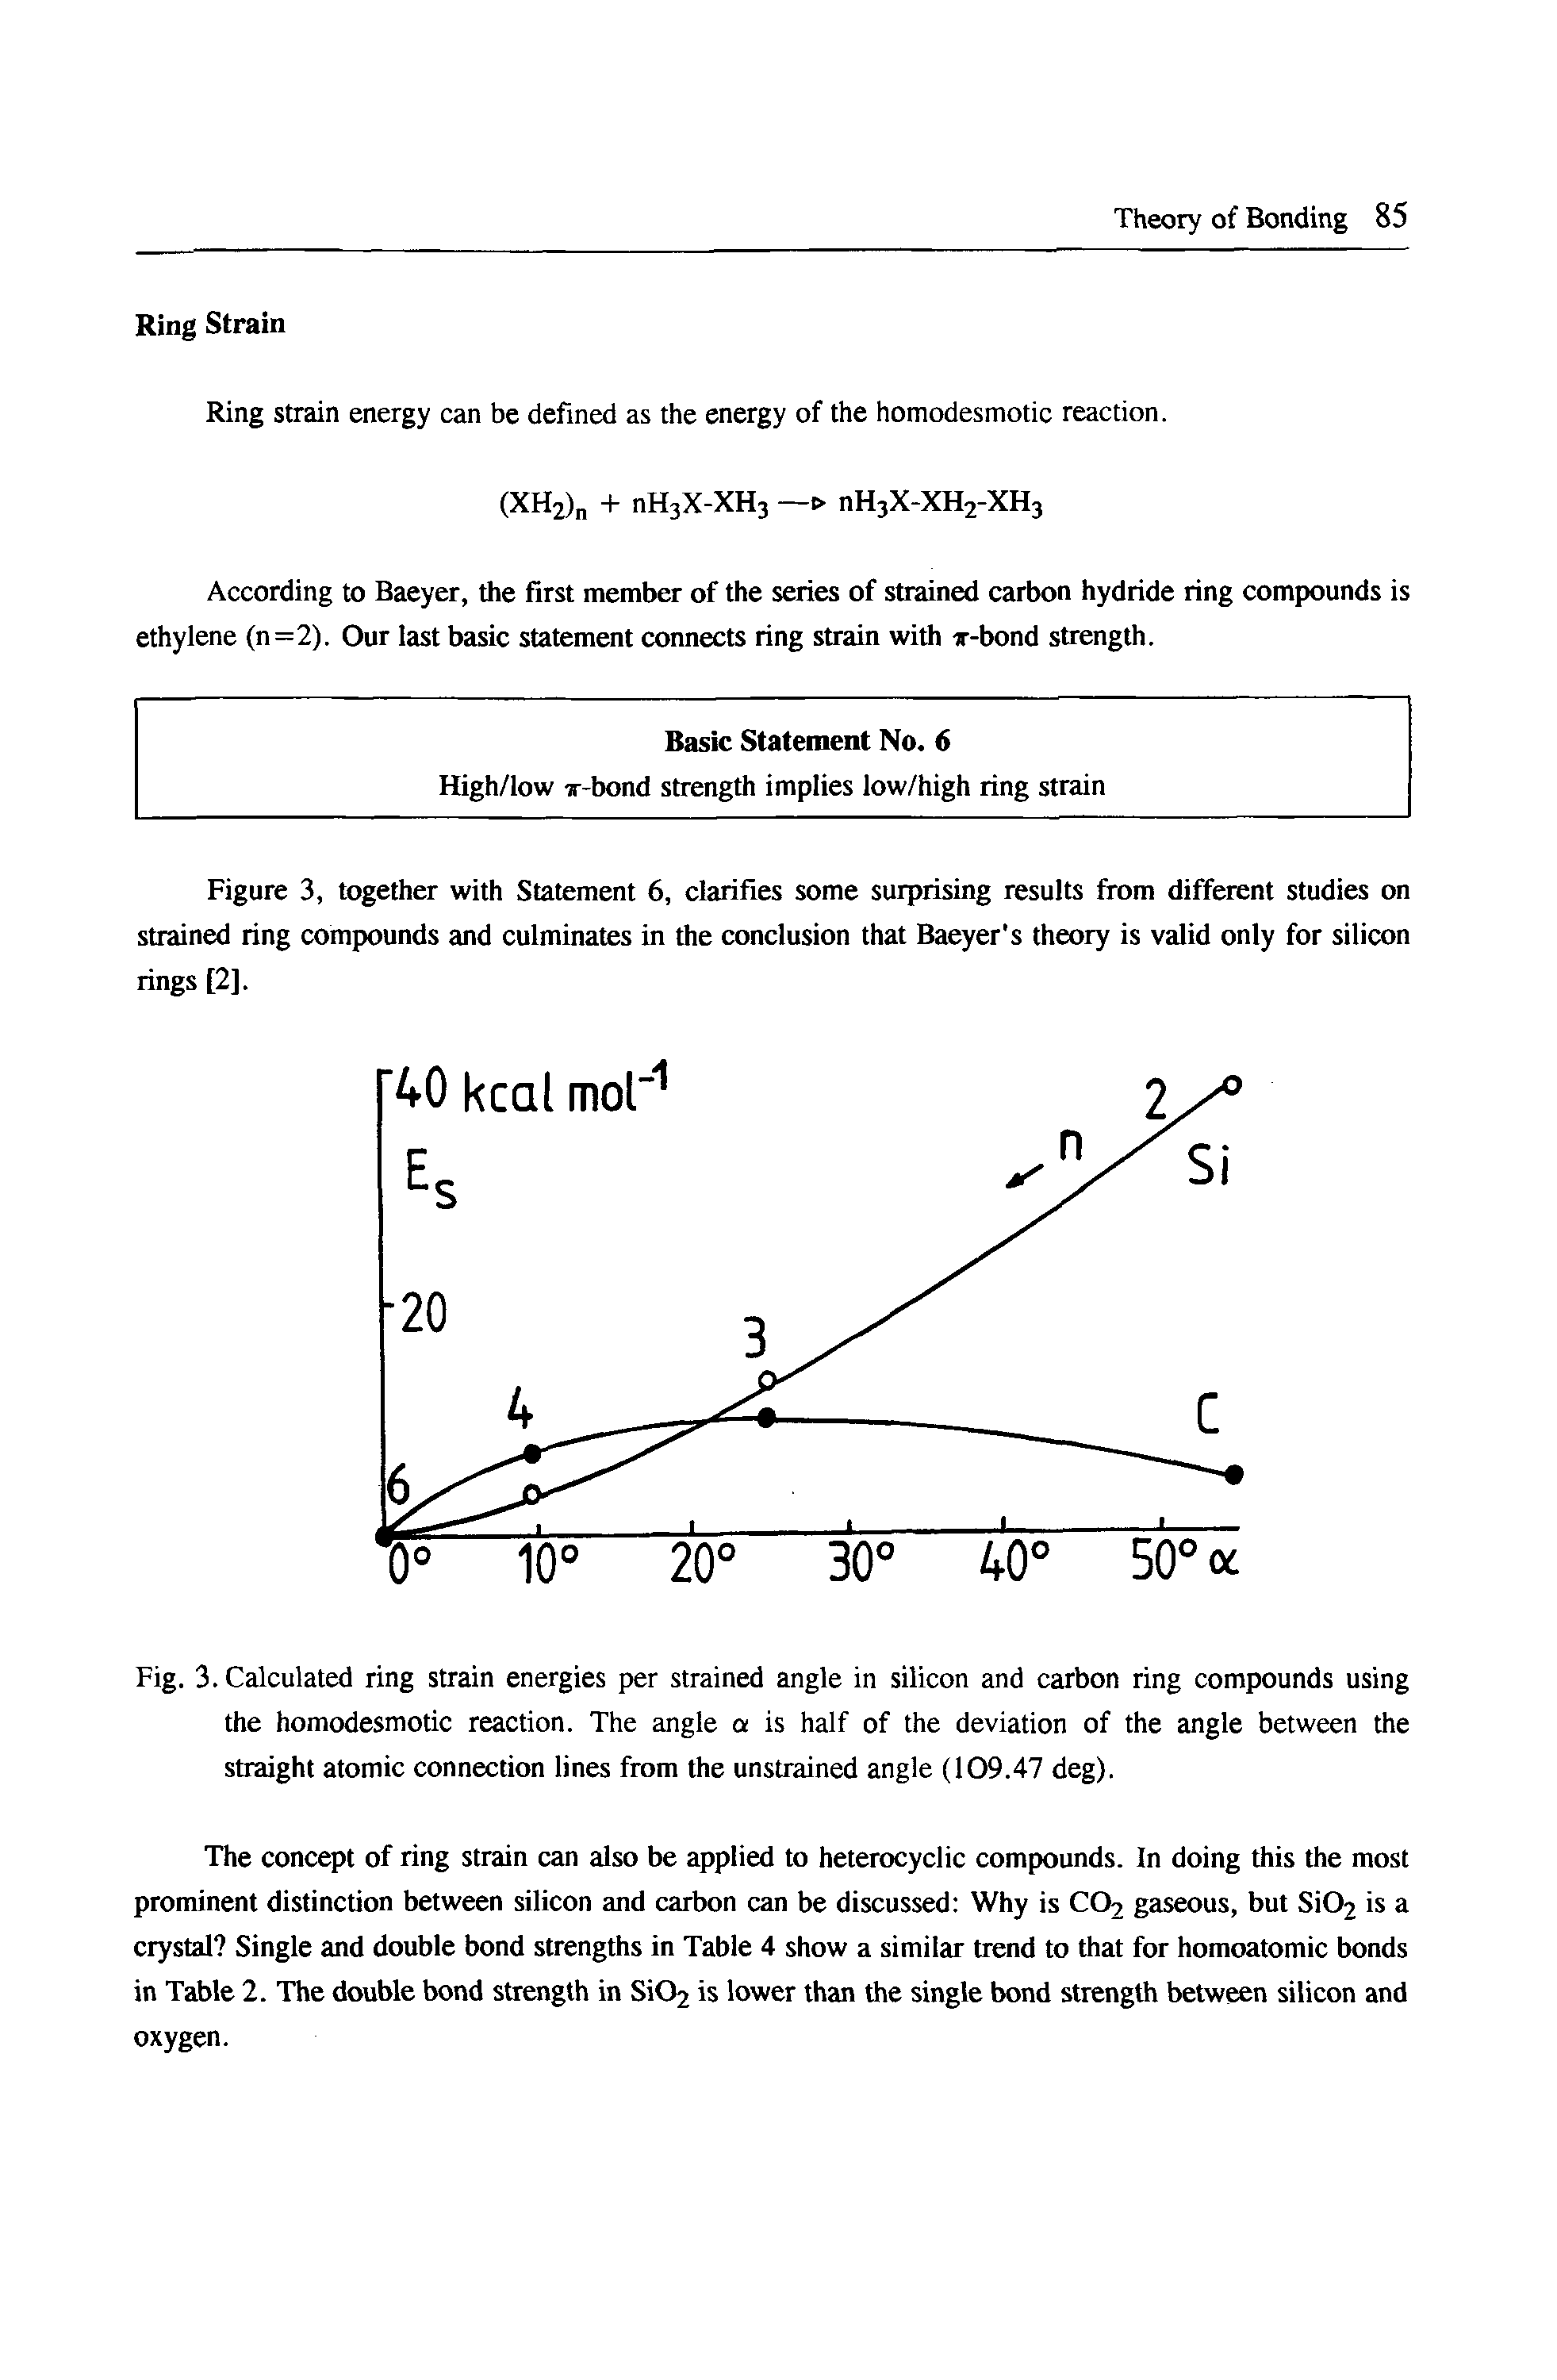 Fig. 3. Calculated ring strain energies per strained angle in silicon and carbon ring compounds using the homodesmotic reaction. The angle a is half of the deviation of the angle between the straight atomic connection lines from the unstrained angle (109.47 deg).